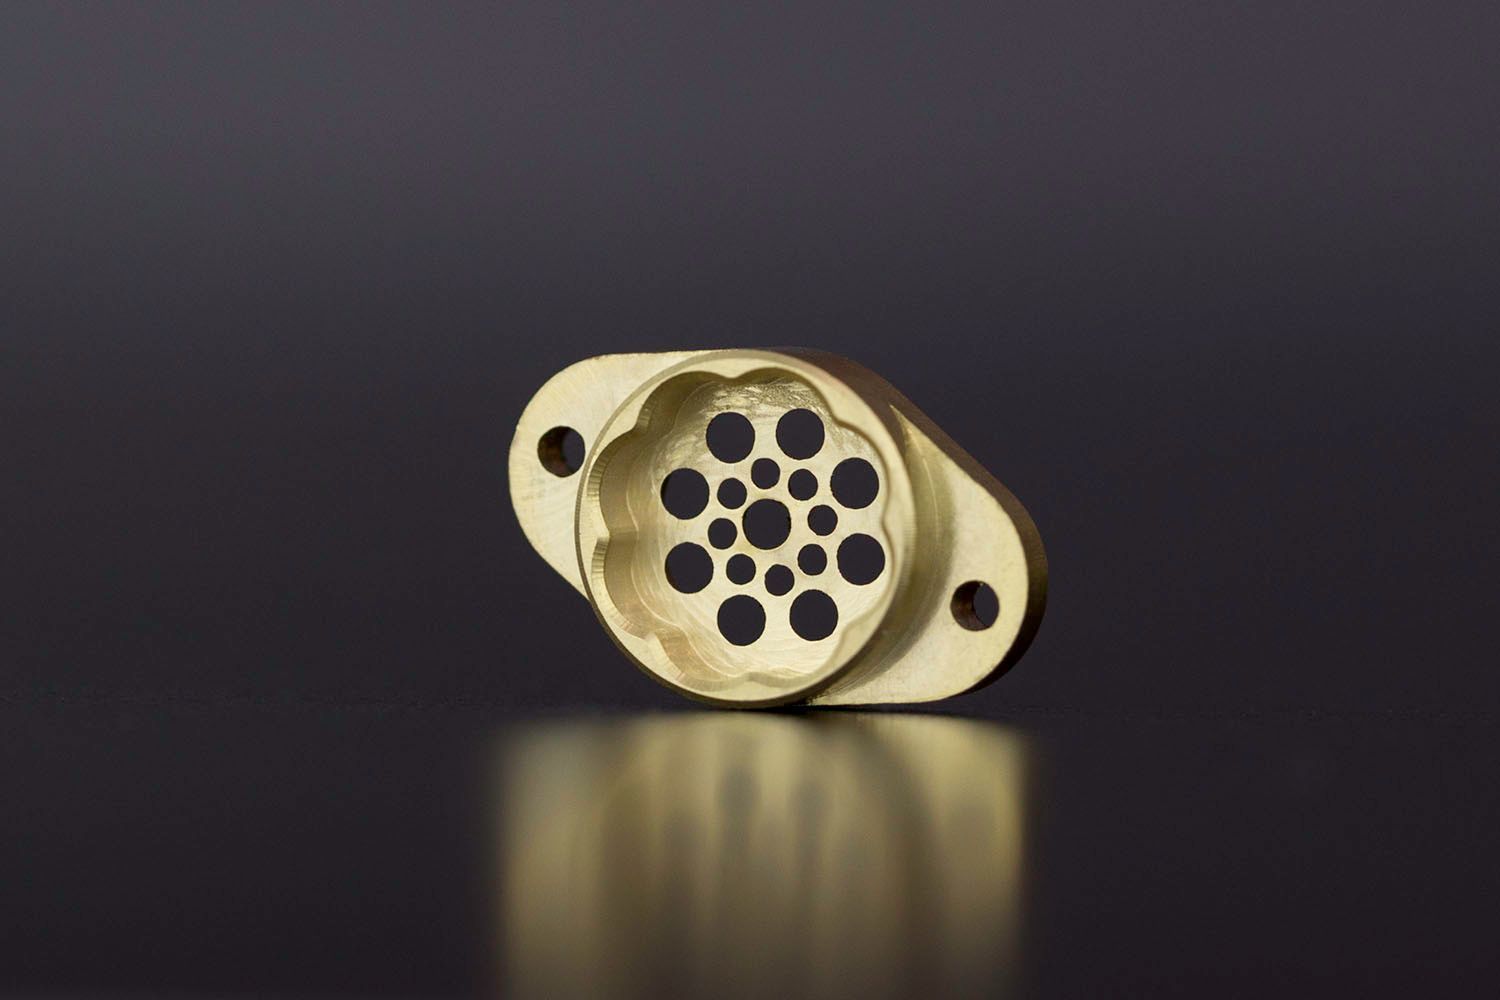 A brass part featuring drilled holes of various sizes.